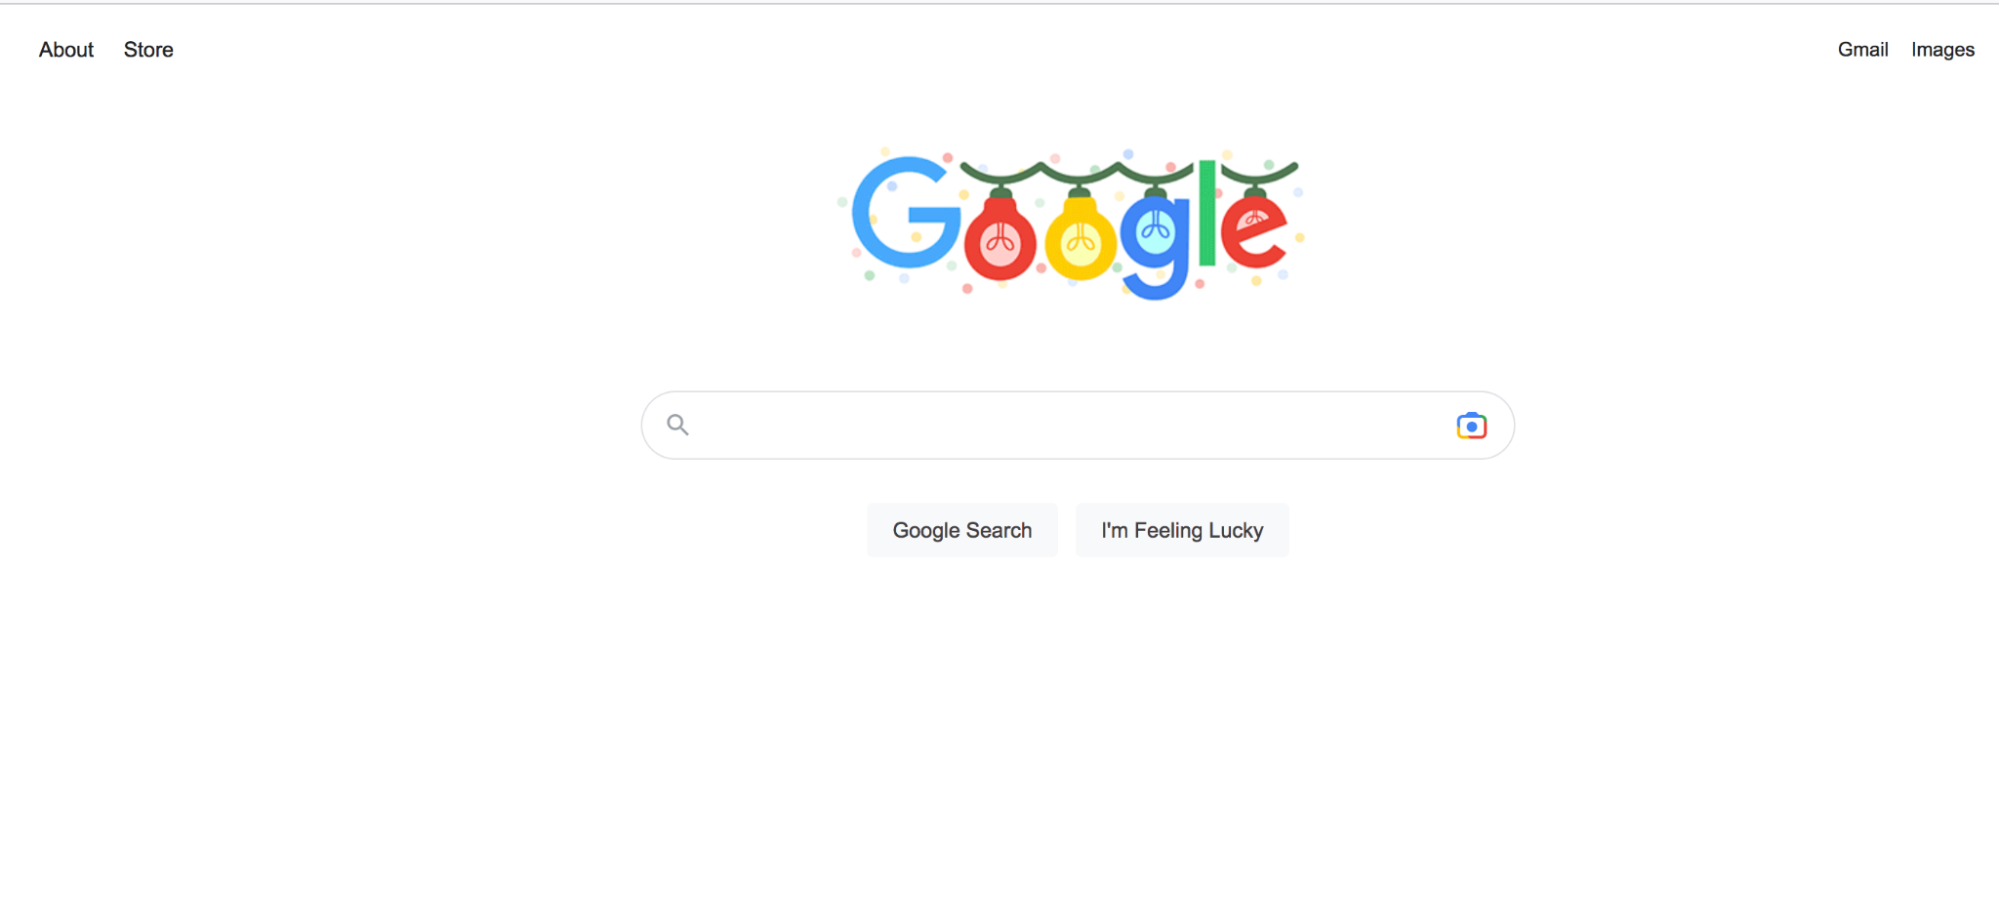 Yes, Google’s all festive too!